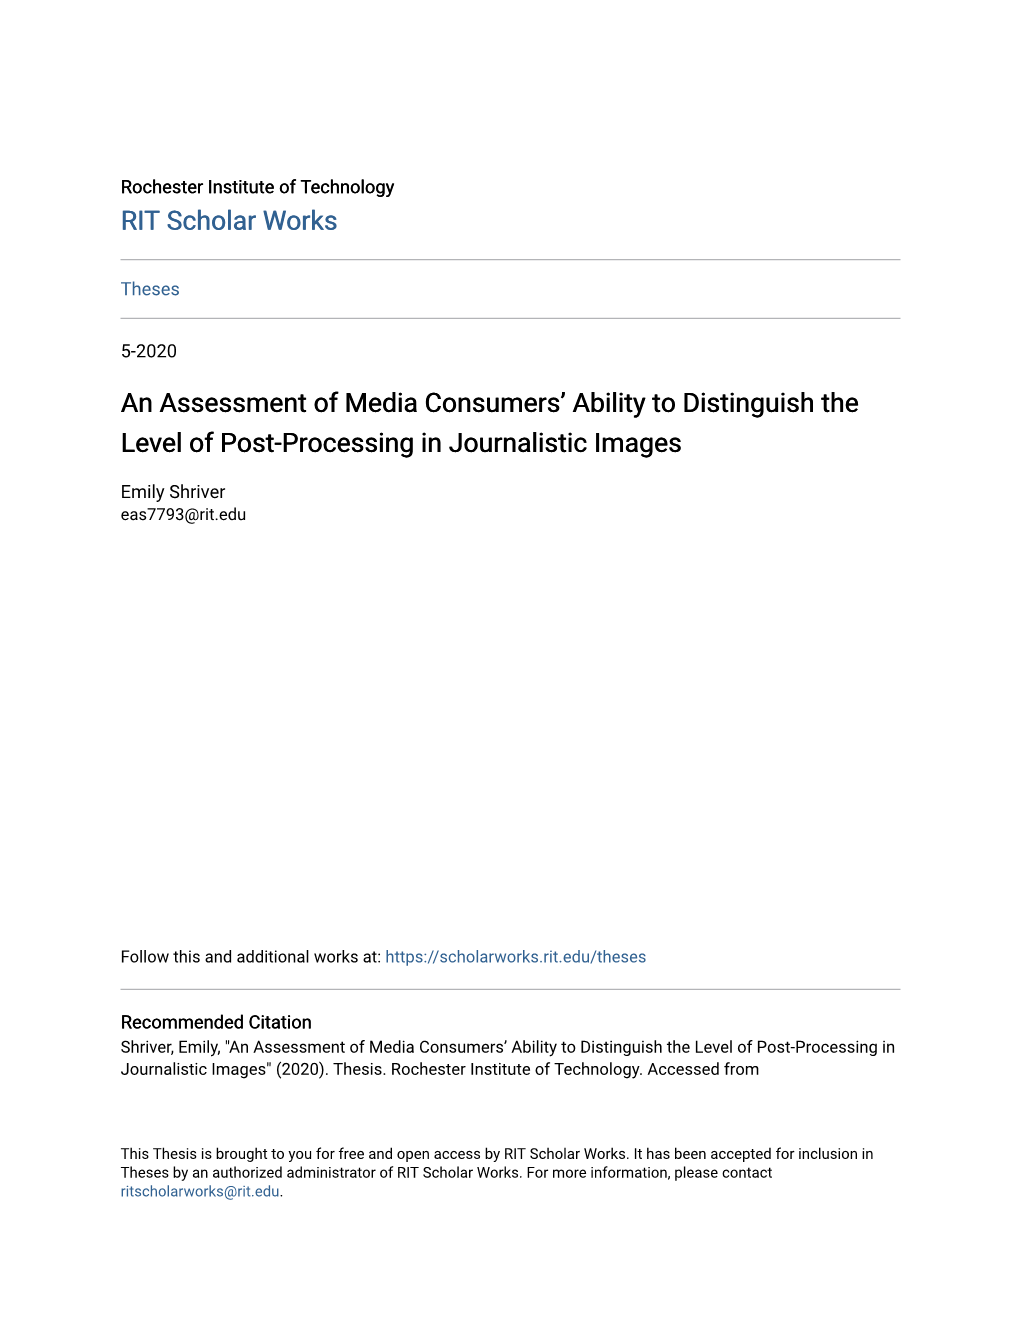 An Assessment of Media Consumers' Ability to Distinguish the Level of Post-Processing in Journalistic Images